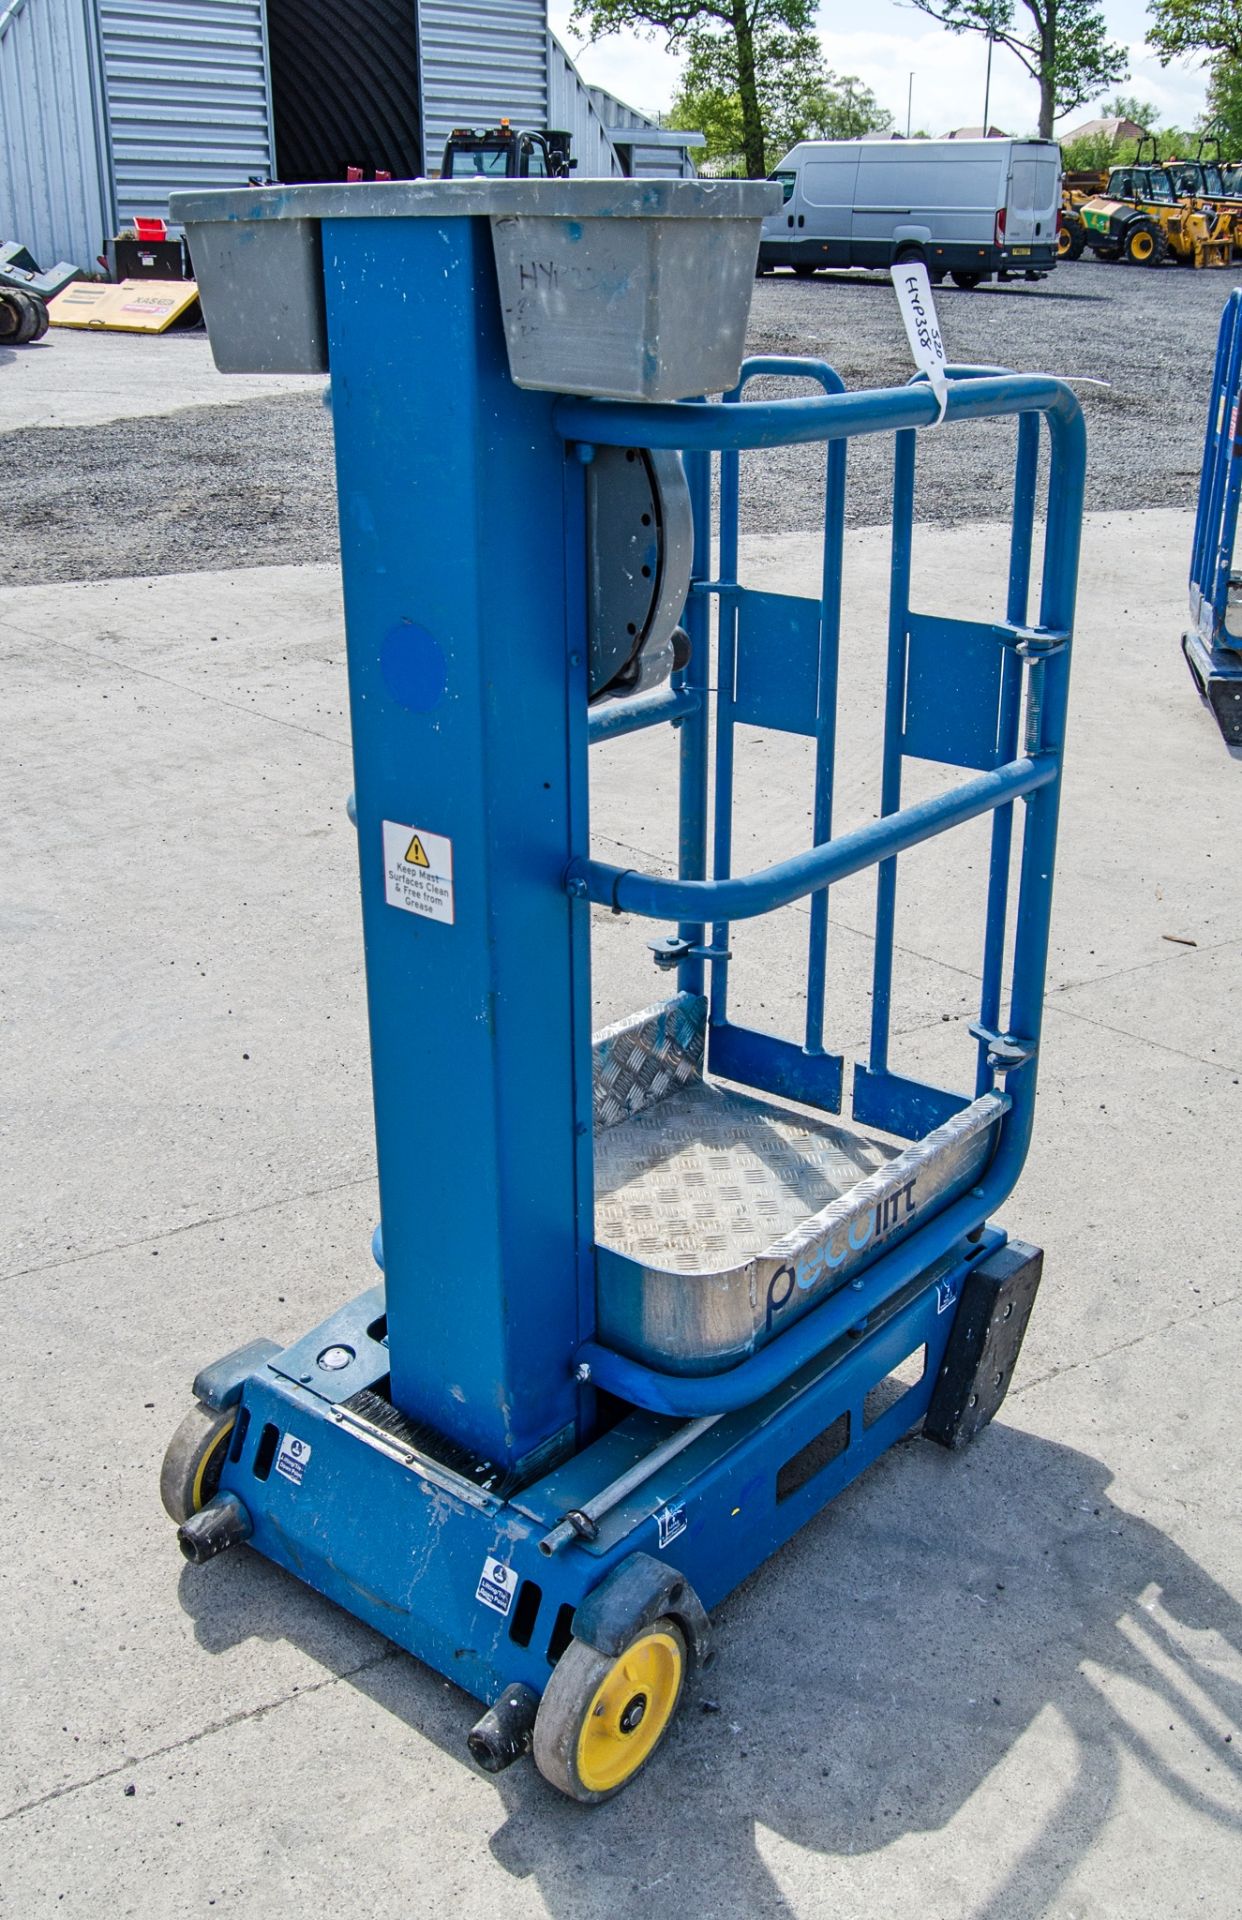 Power Towers Pecolift manual vertical mast access platform HYP358 - Image 2 of 3